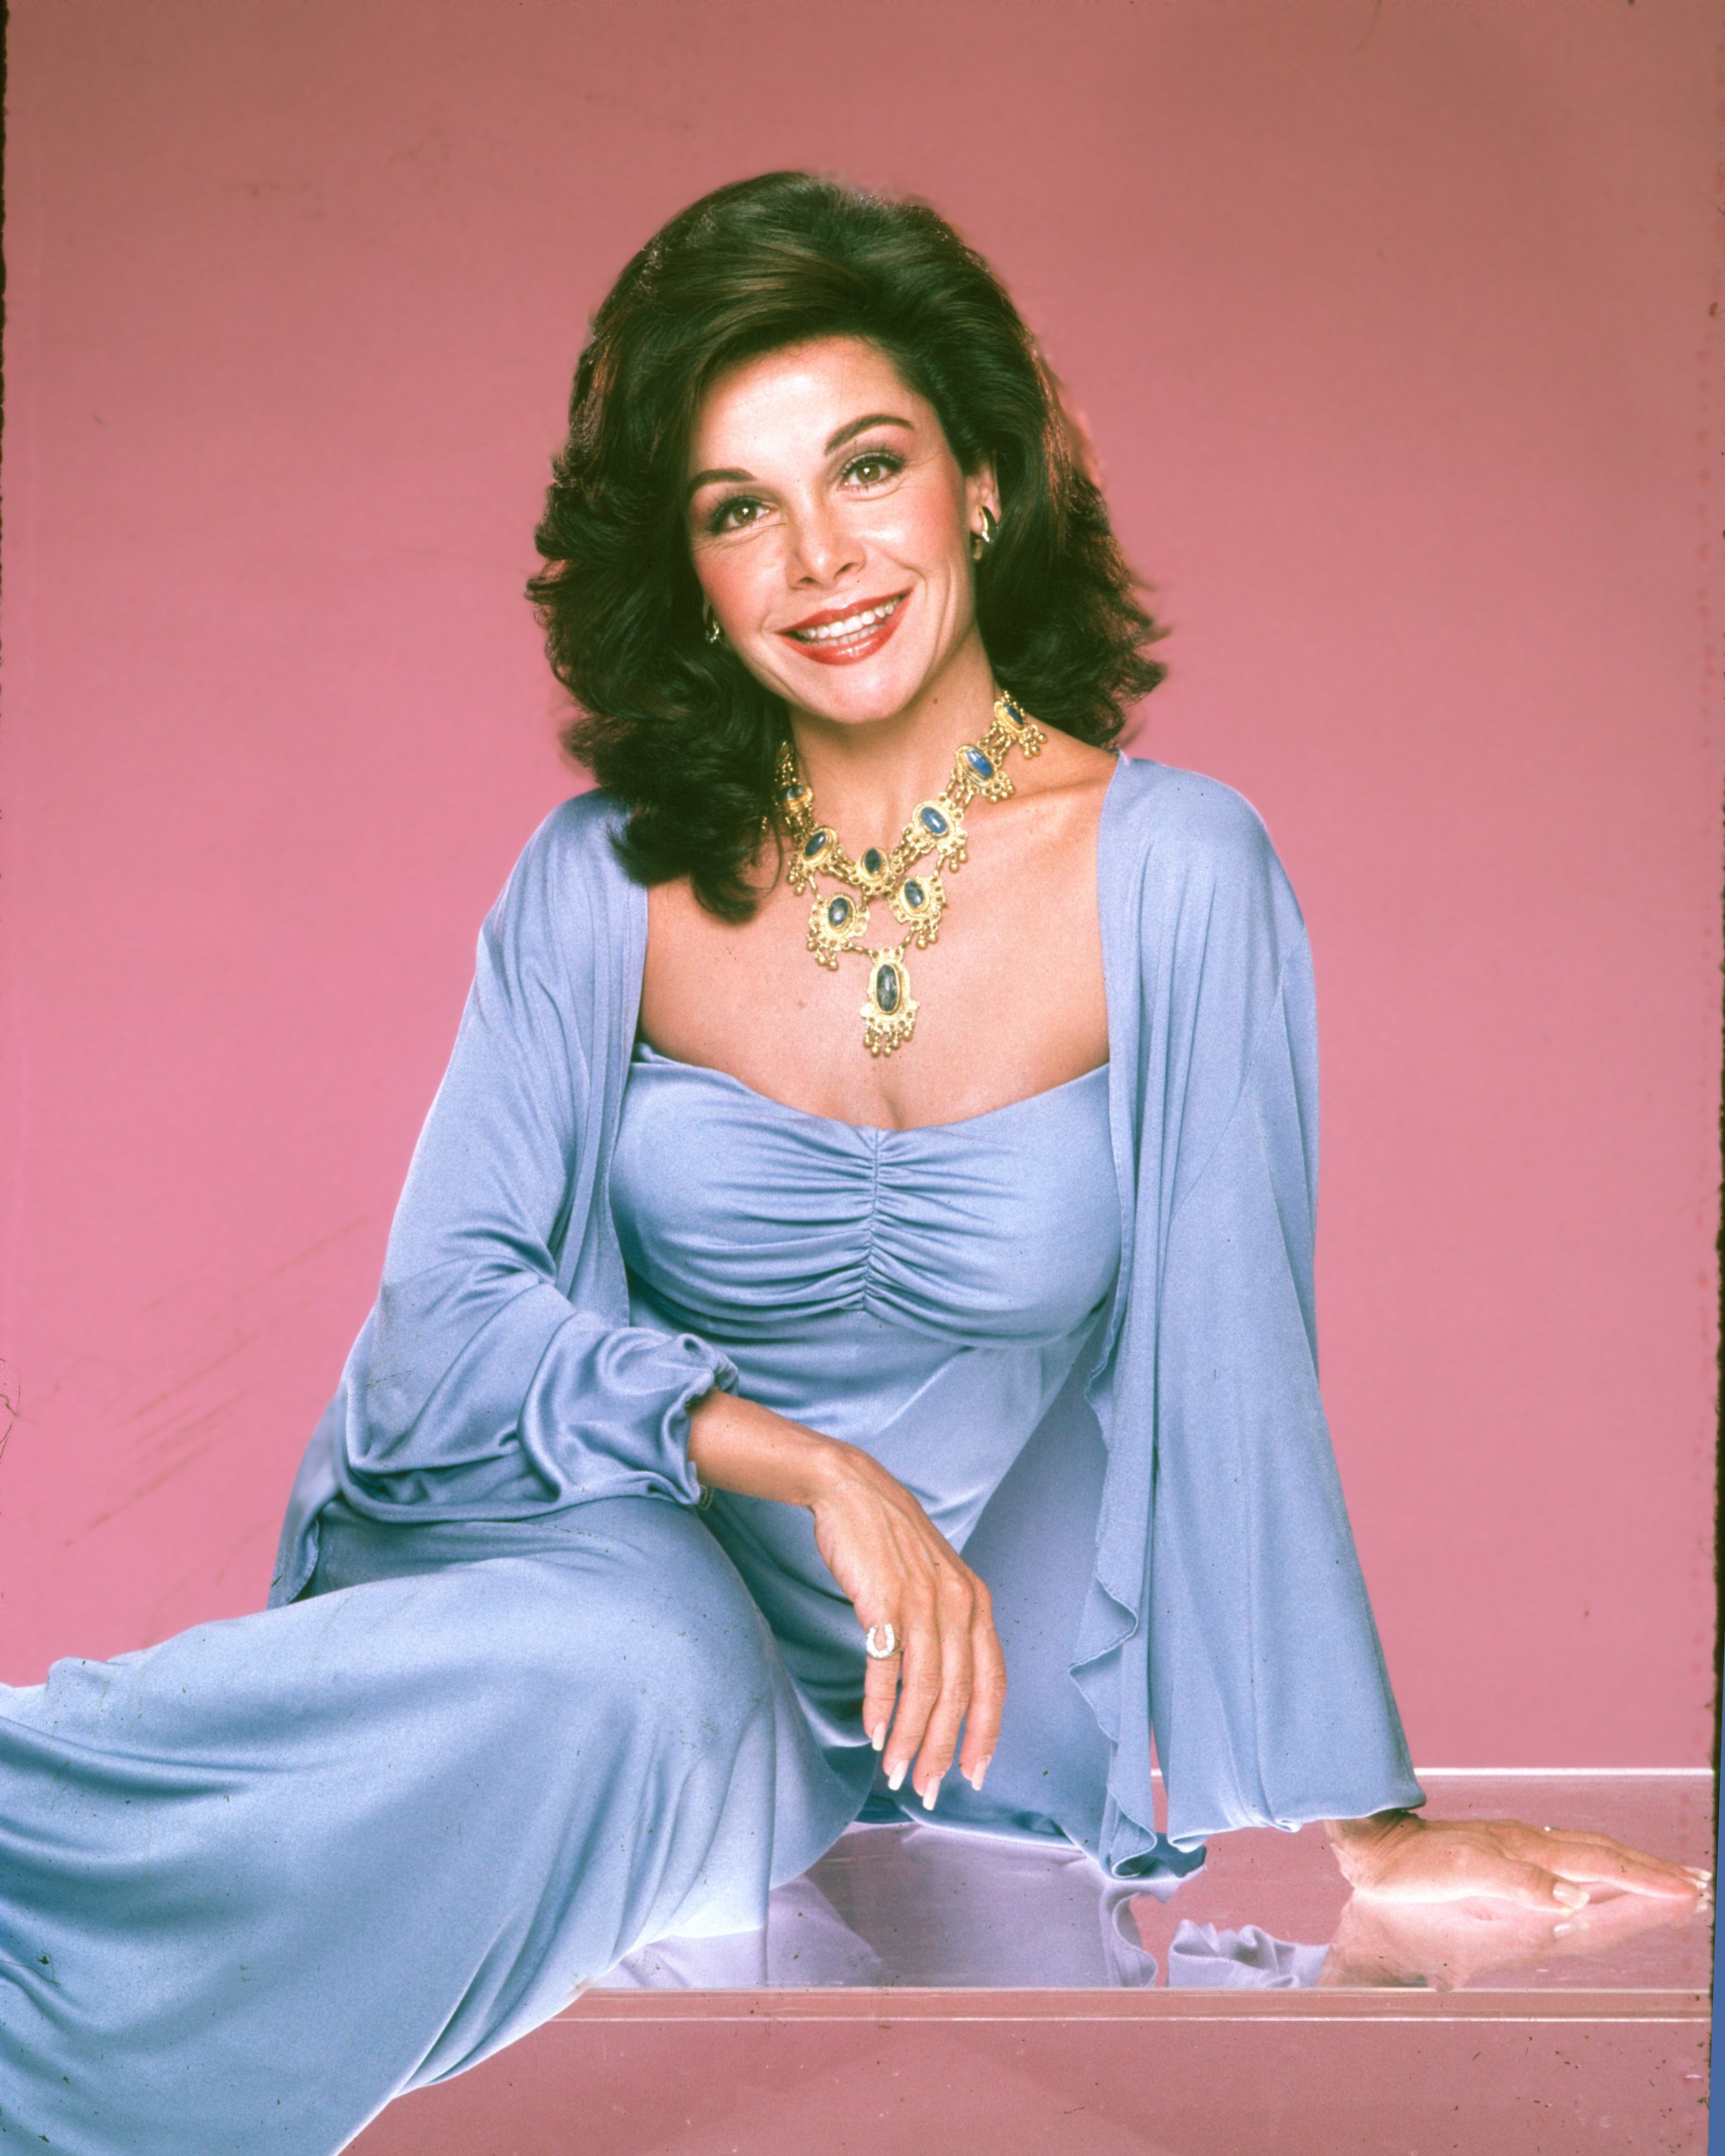  Annette Funicello poses for a portrait in 1994 in Los Angeles, California | Source: Getty Images